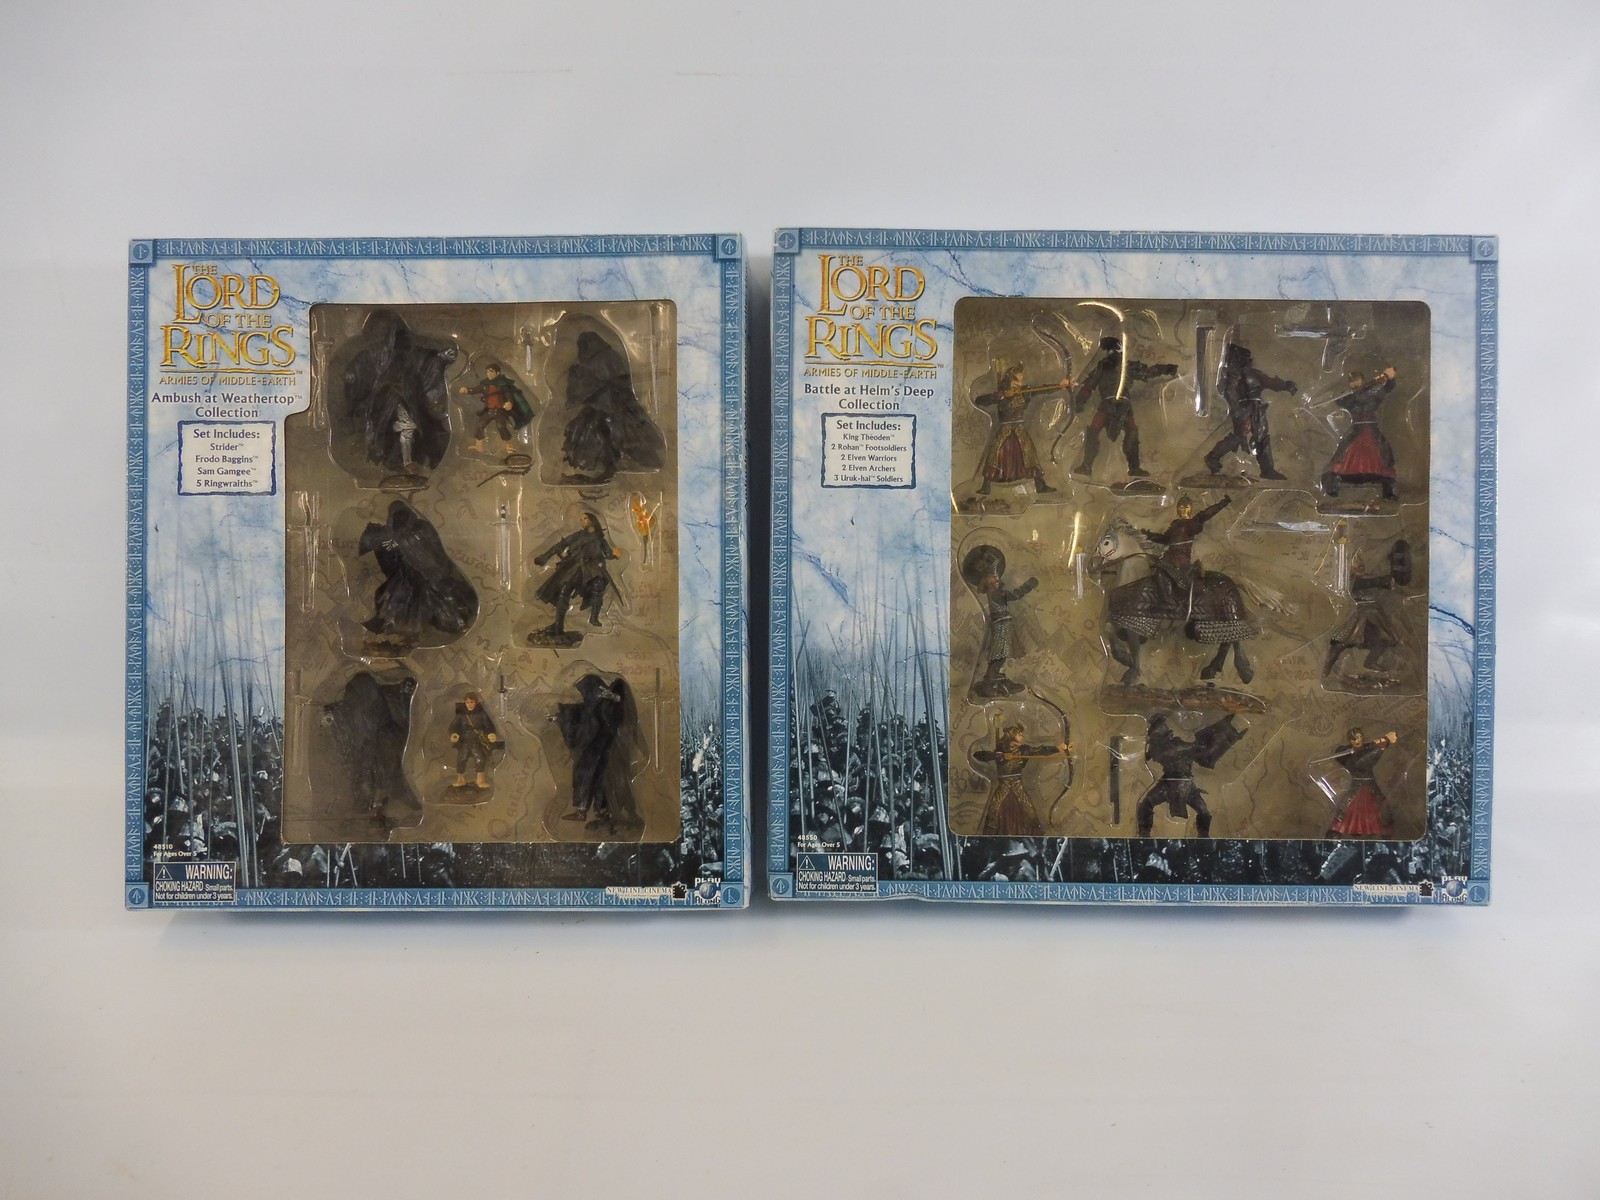 Two boxed Lord of the Rings Armies of Middle Earth sets of figures.